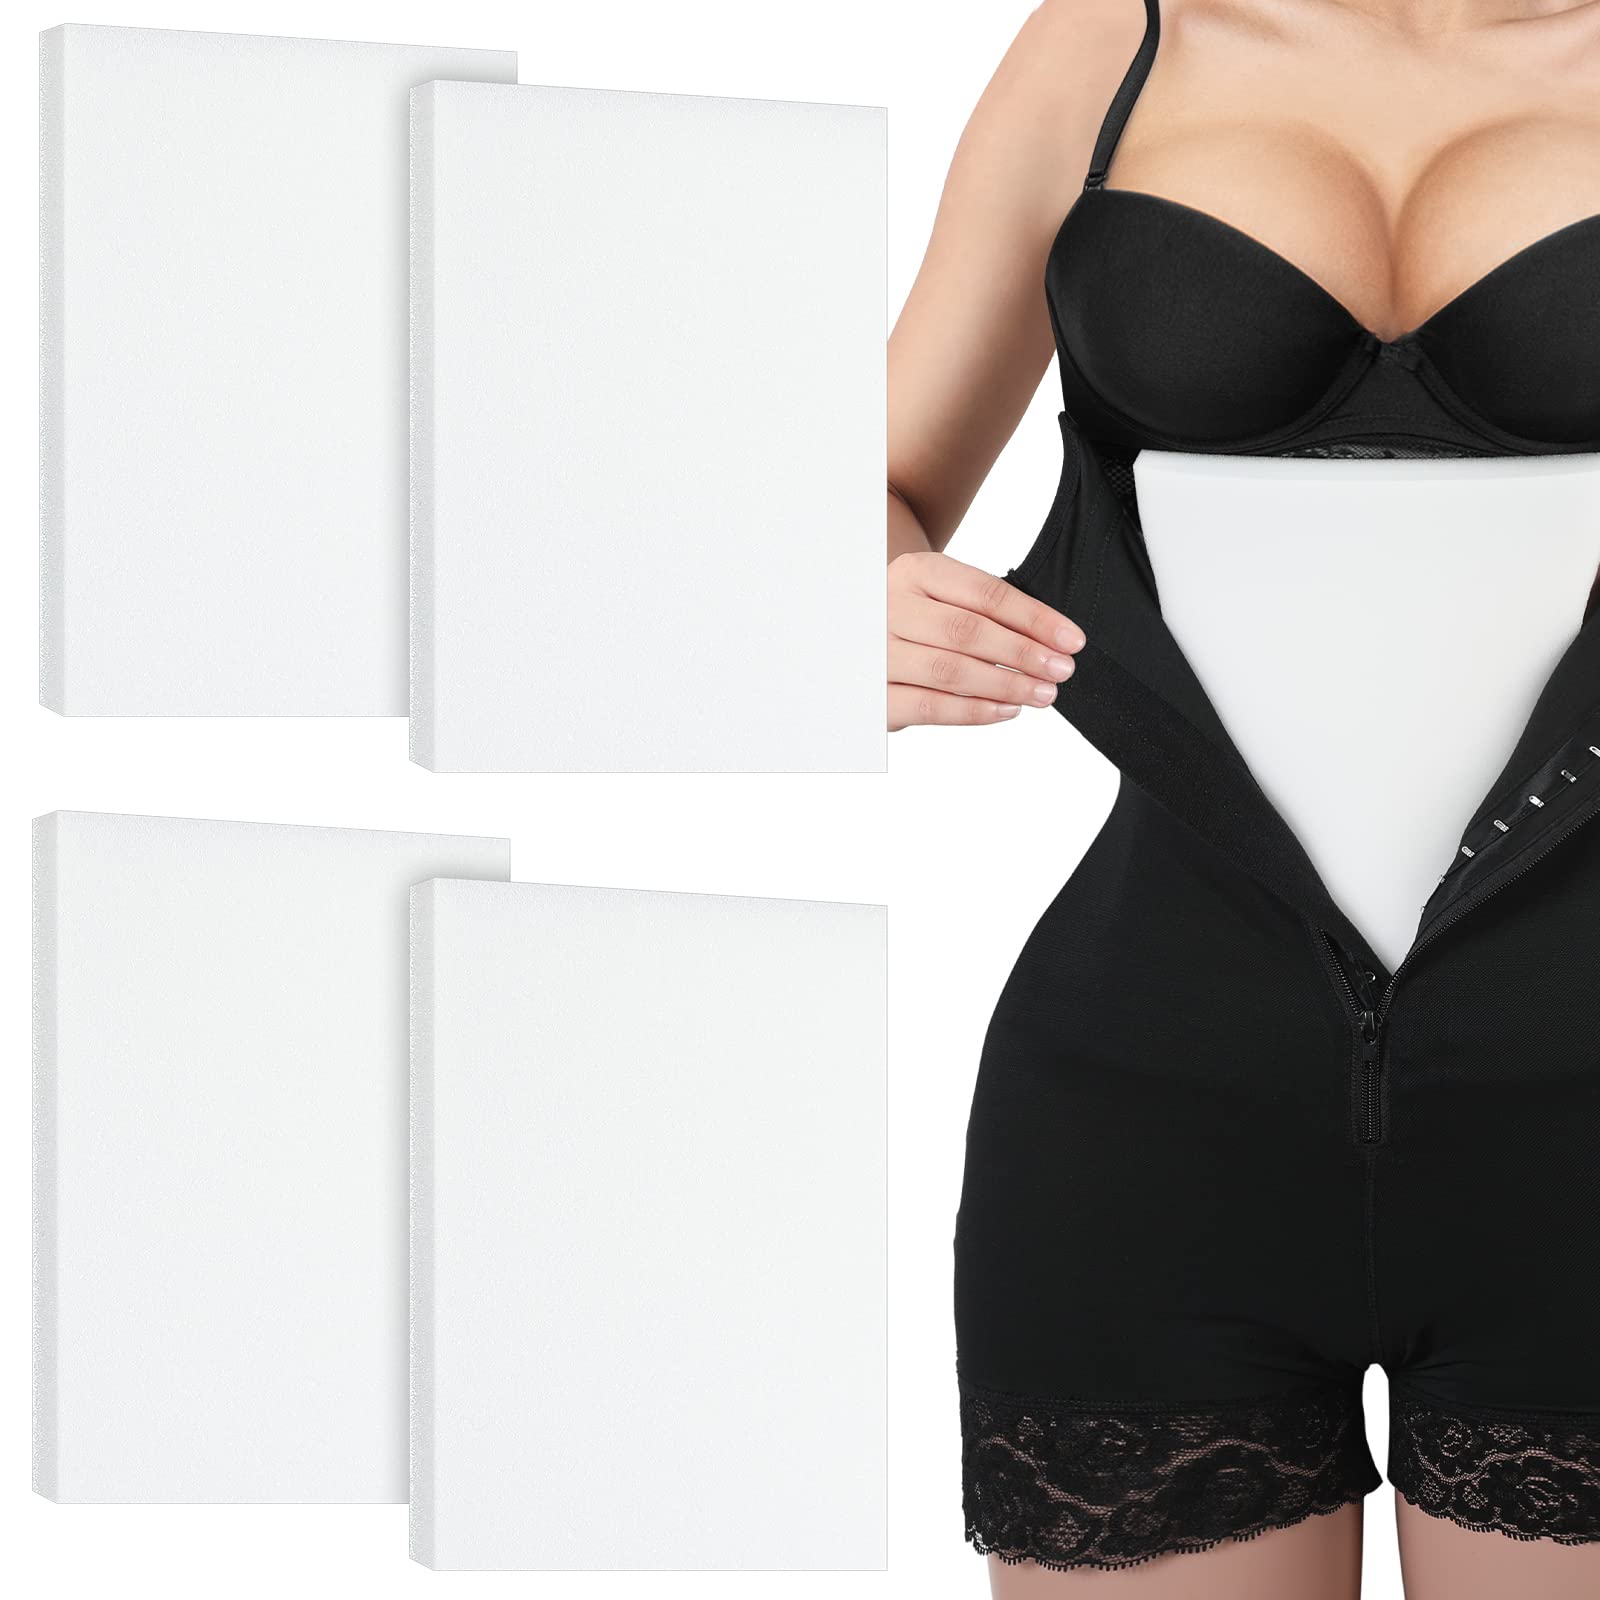 compression garment for liposuction, compression garment for liposuction  Suppliers and Manufacturers at